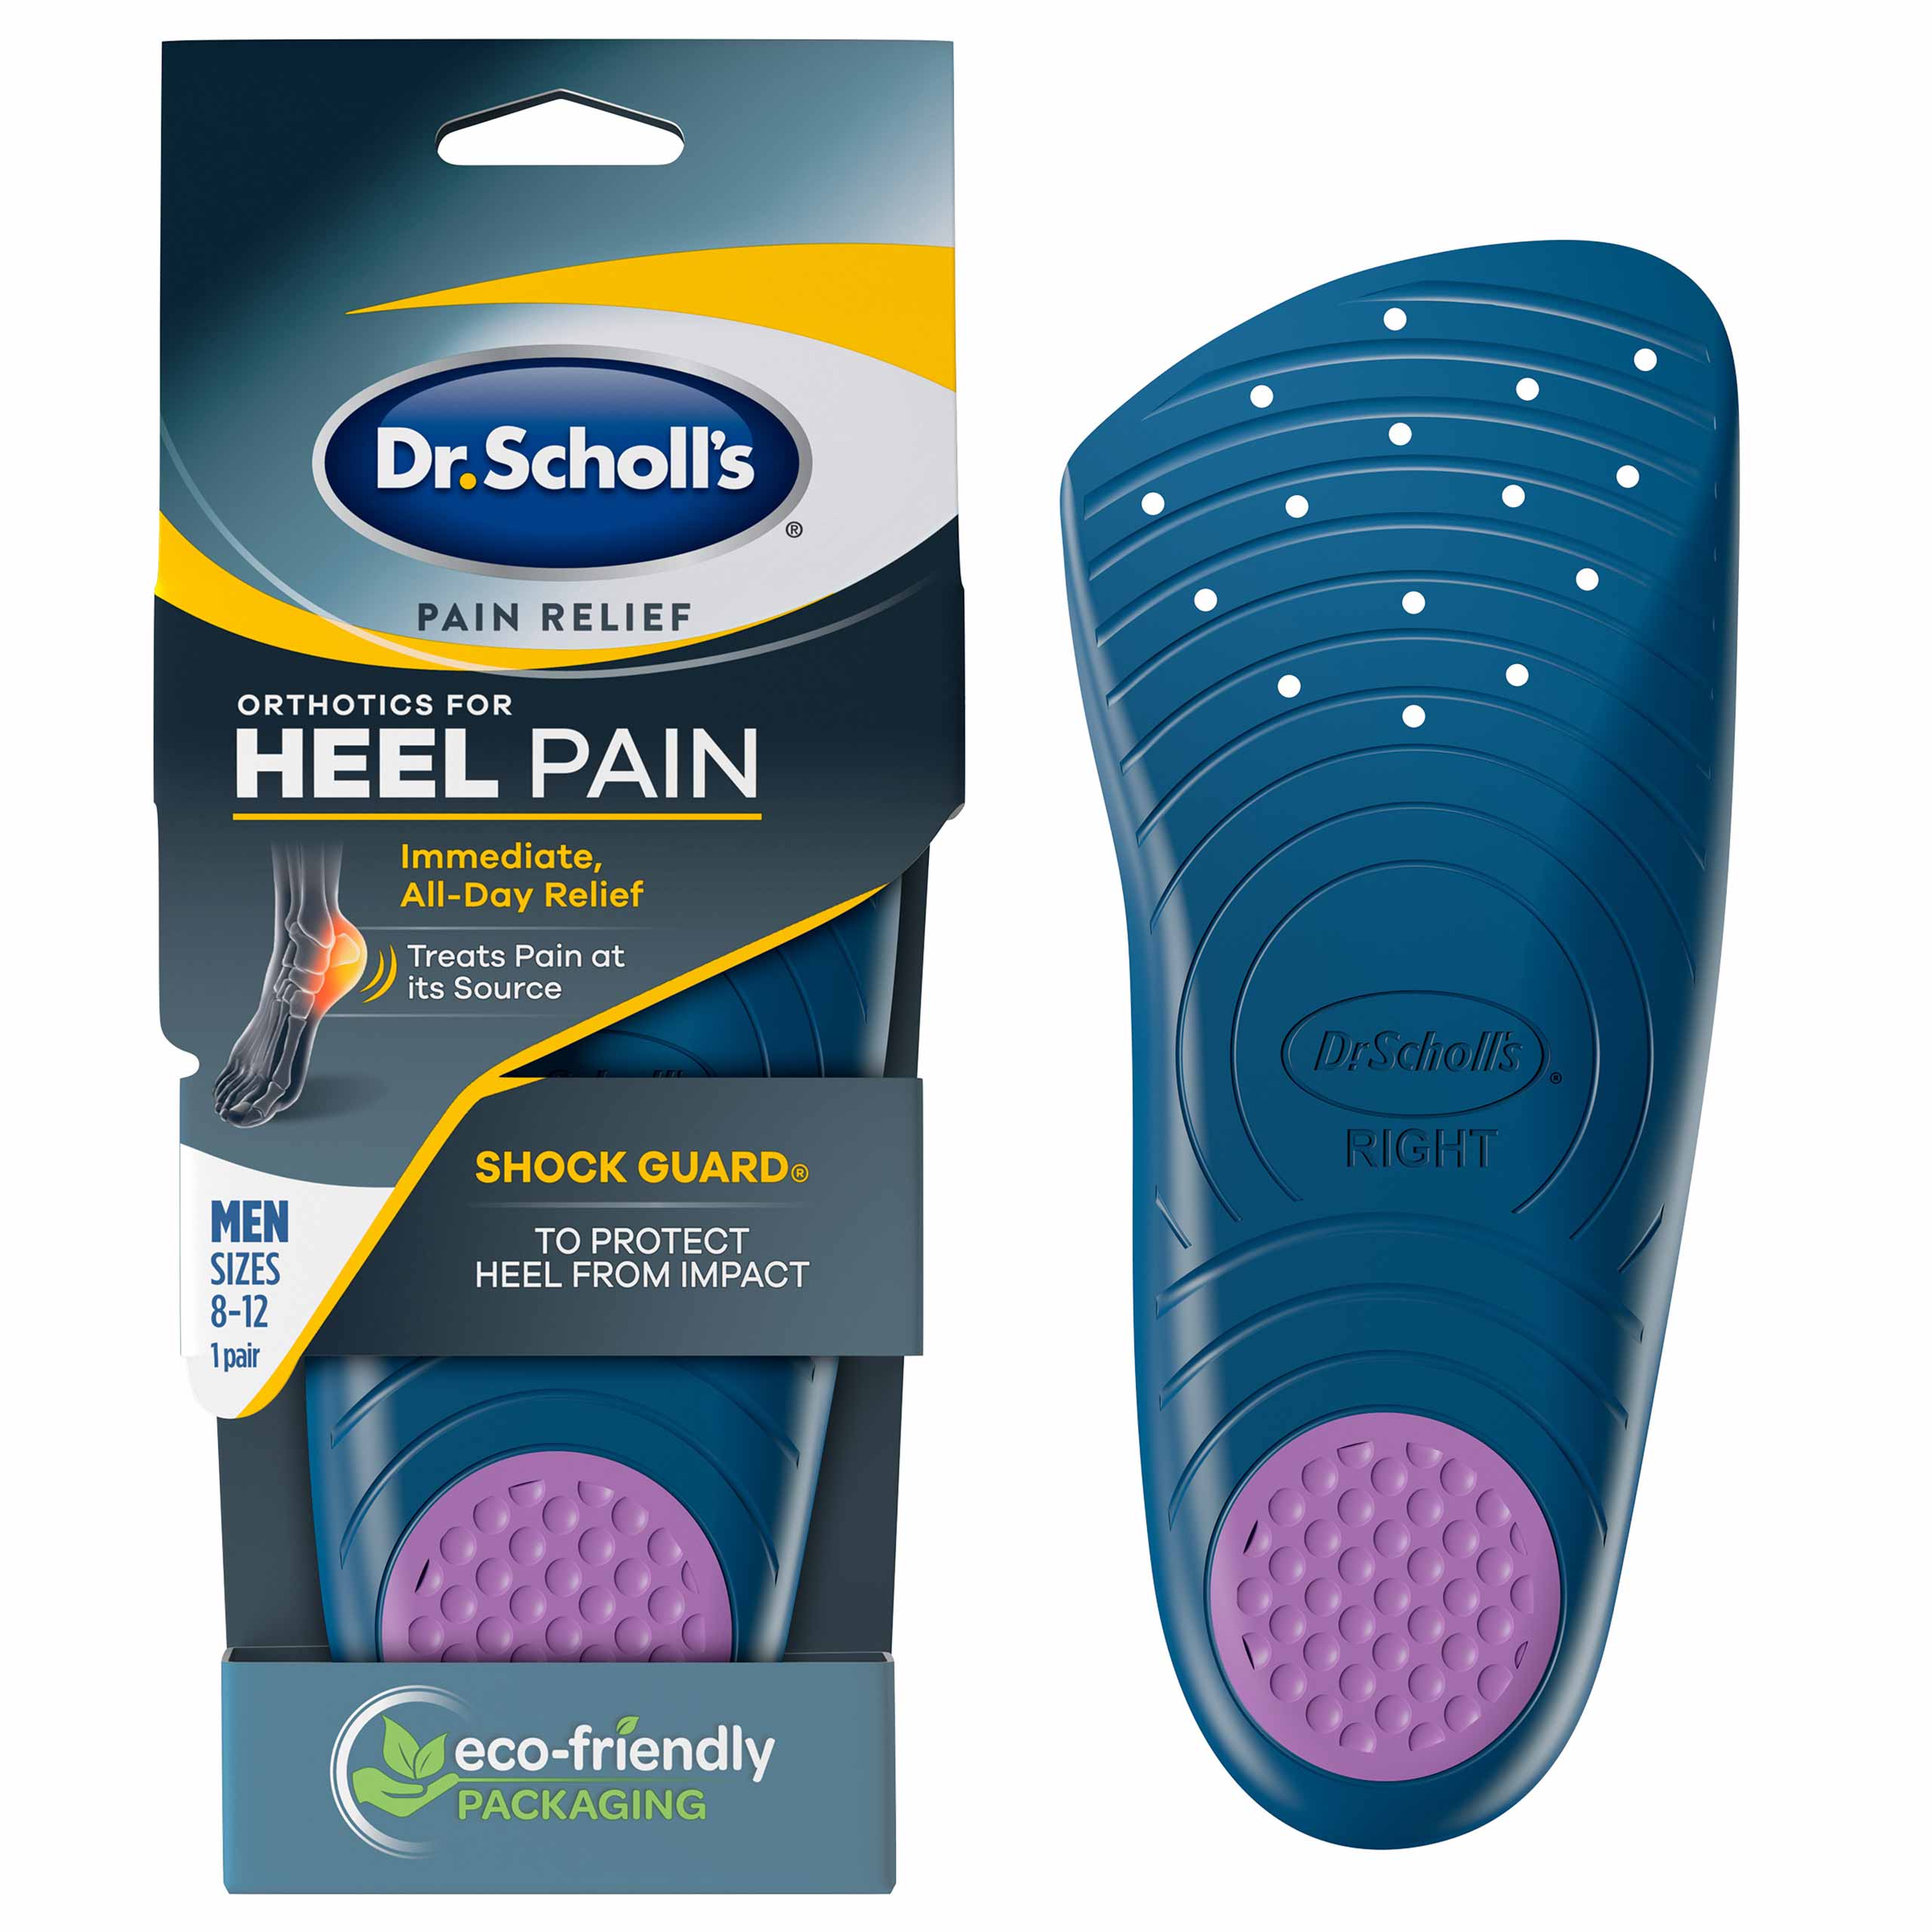 PECAPRO Silicone Gel Heel Pad Socks with Orthopedic Heel Support, Ideal for Heel  Pain Relief, Swelling, and Dry Cracked Heels Repair. Includes Ankle Support  Cushion and Heel Protection (GEL HEEL) : Amazon.in: